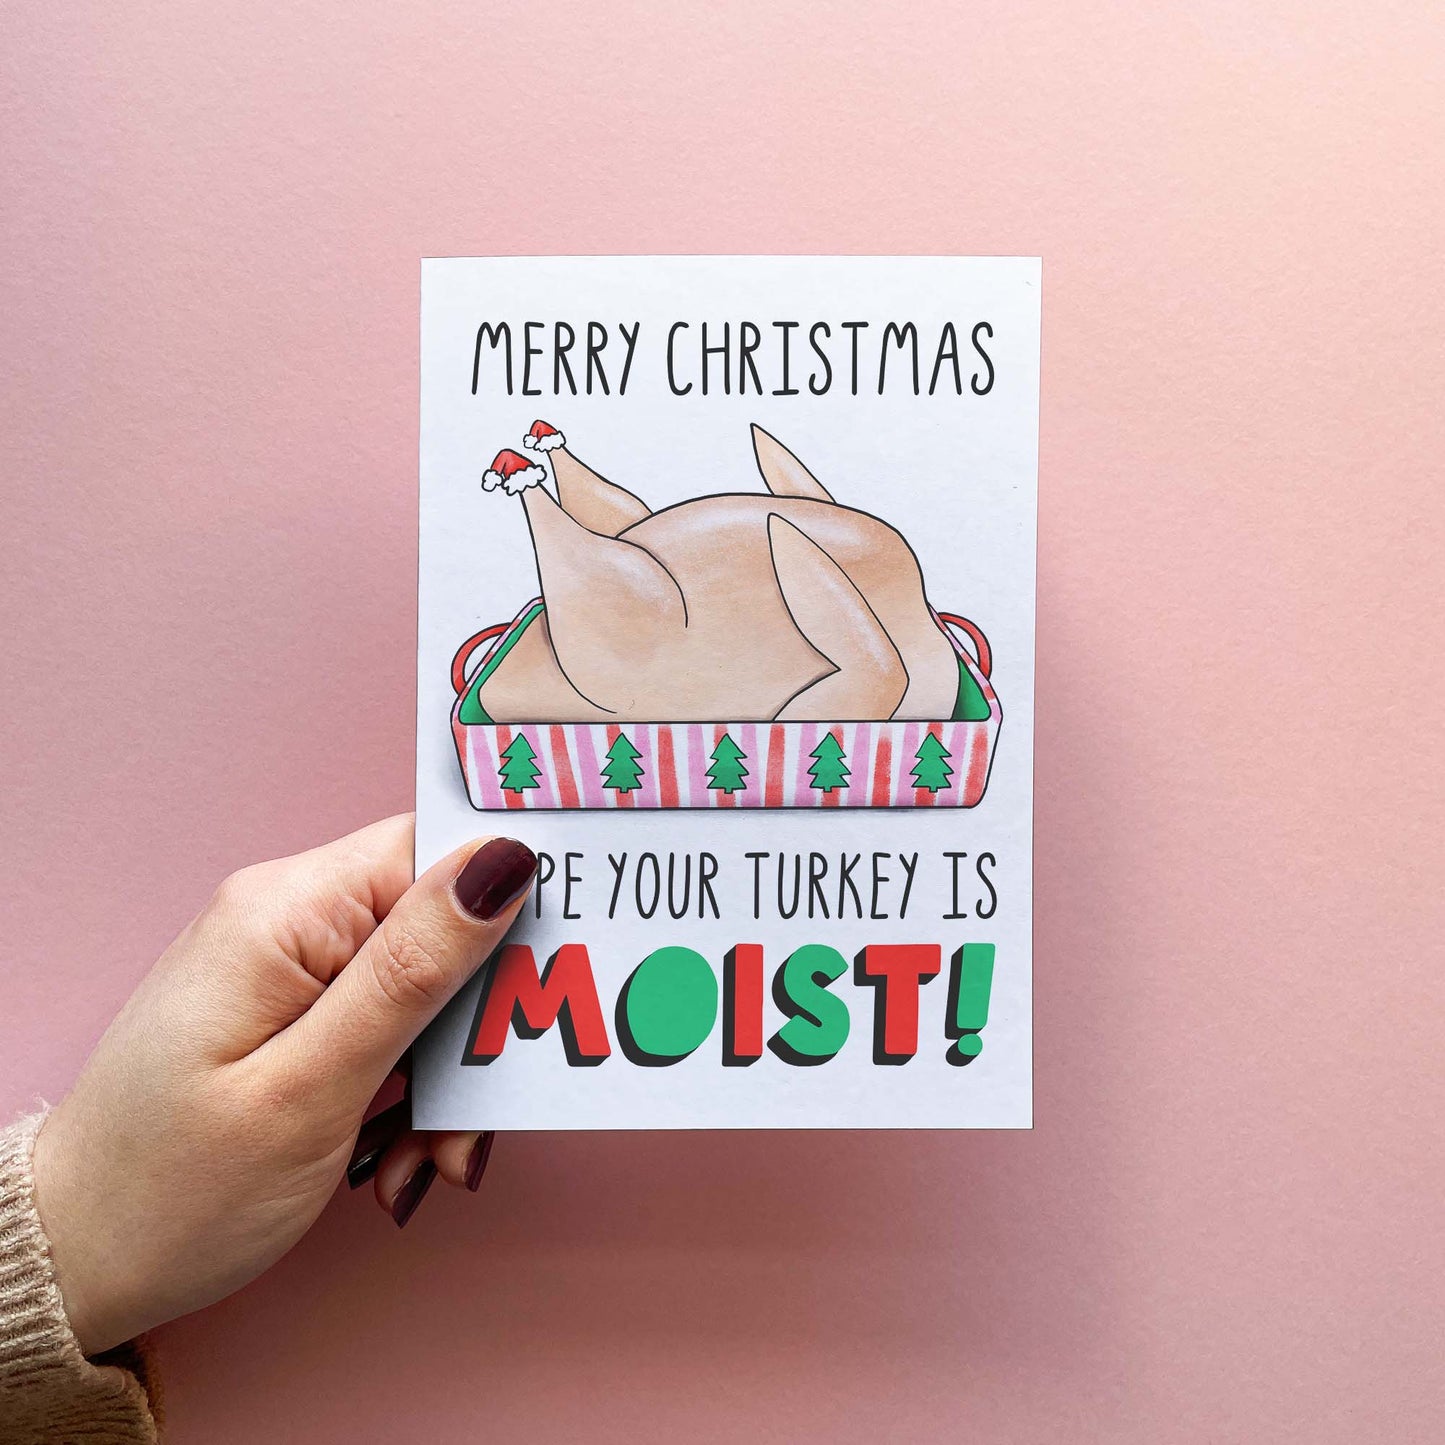 Moist - Funny Merry Christmas Wishes Card